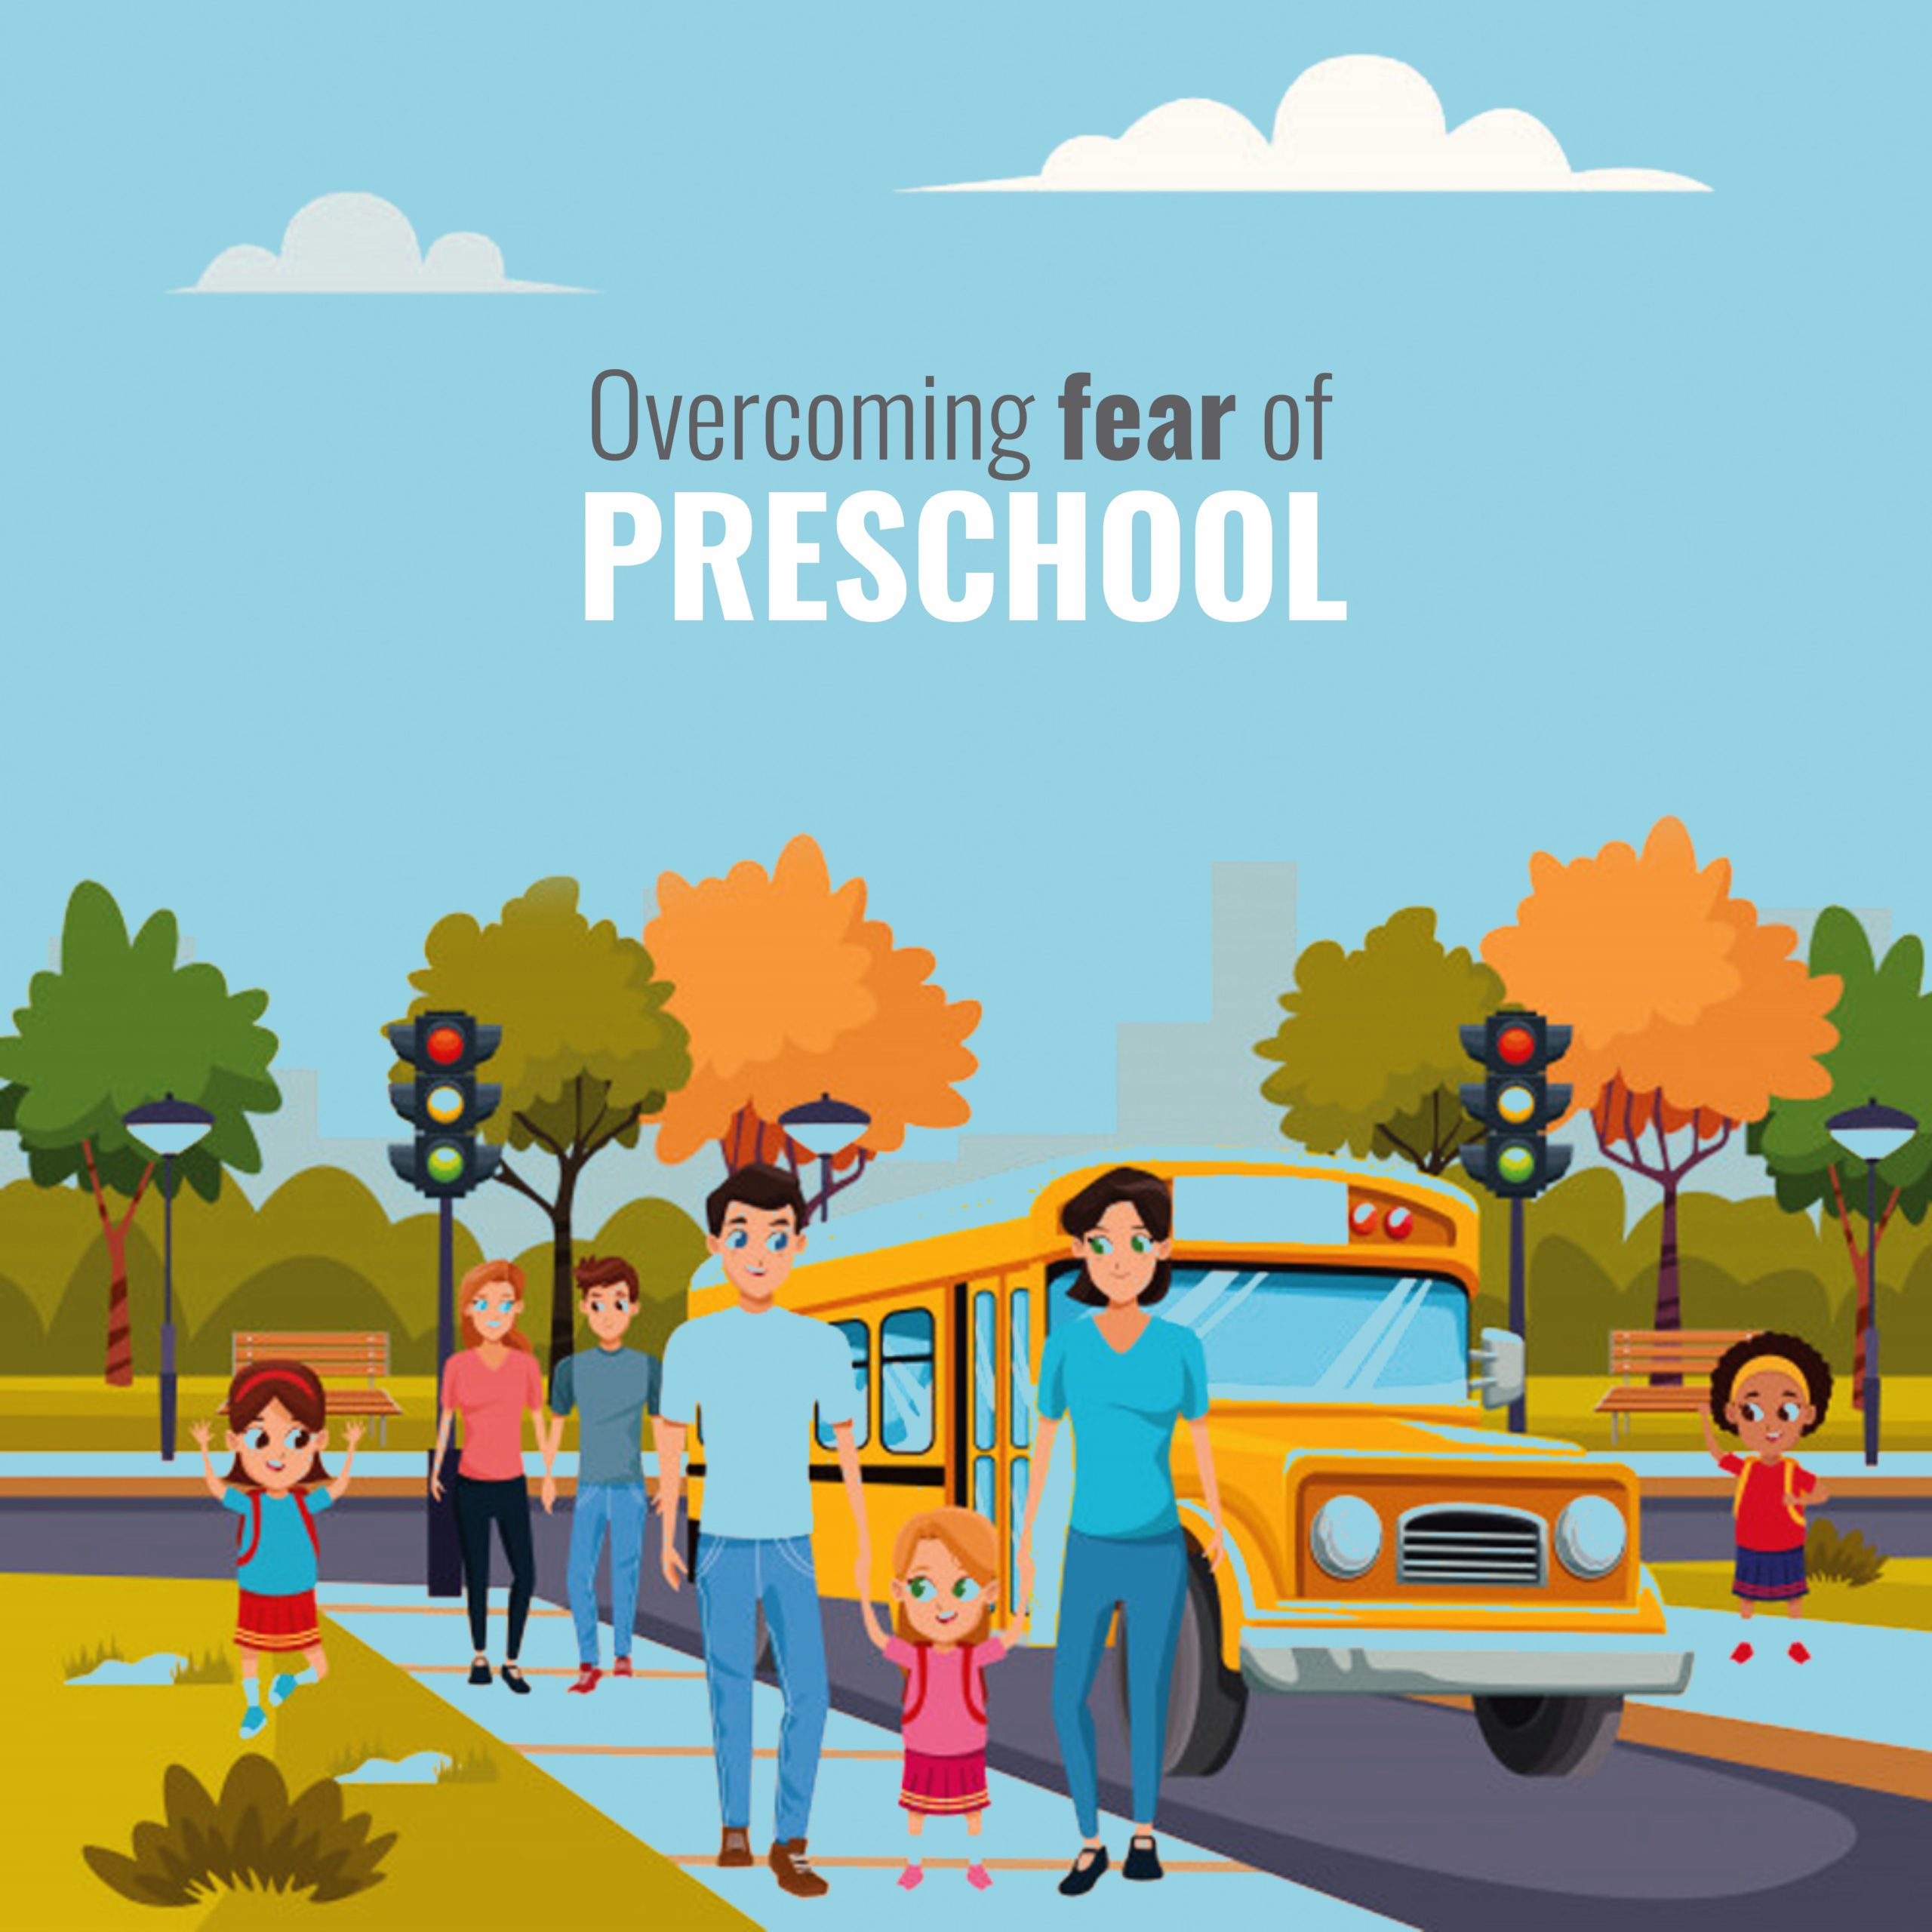 These are just a few suggestions on the best ways to overcome the fear of preschool from children. UC Kindies International Preschool provides child friendly infrastructure including an abundance of stimulating toys and learning tools, both indoors and outdoors to make your kids comfortable. Our well trained staff and teachers help in your kid's transition from home to school. Do drop by and visit our preschool to know more!